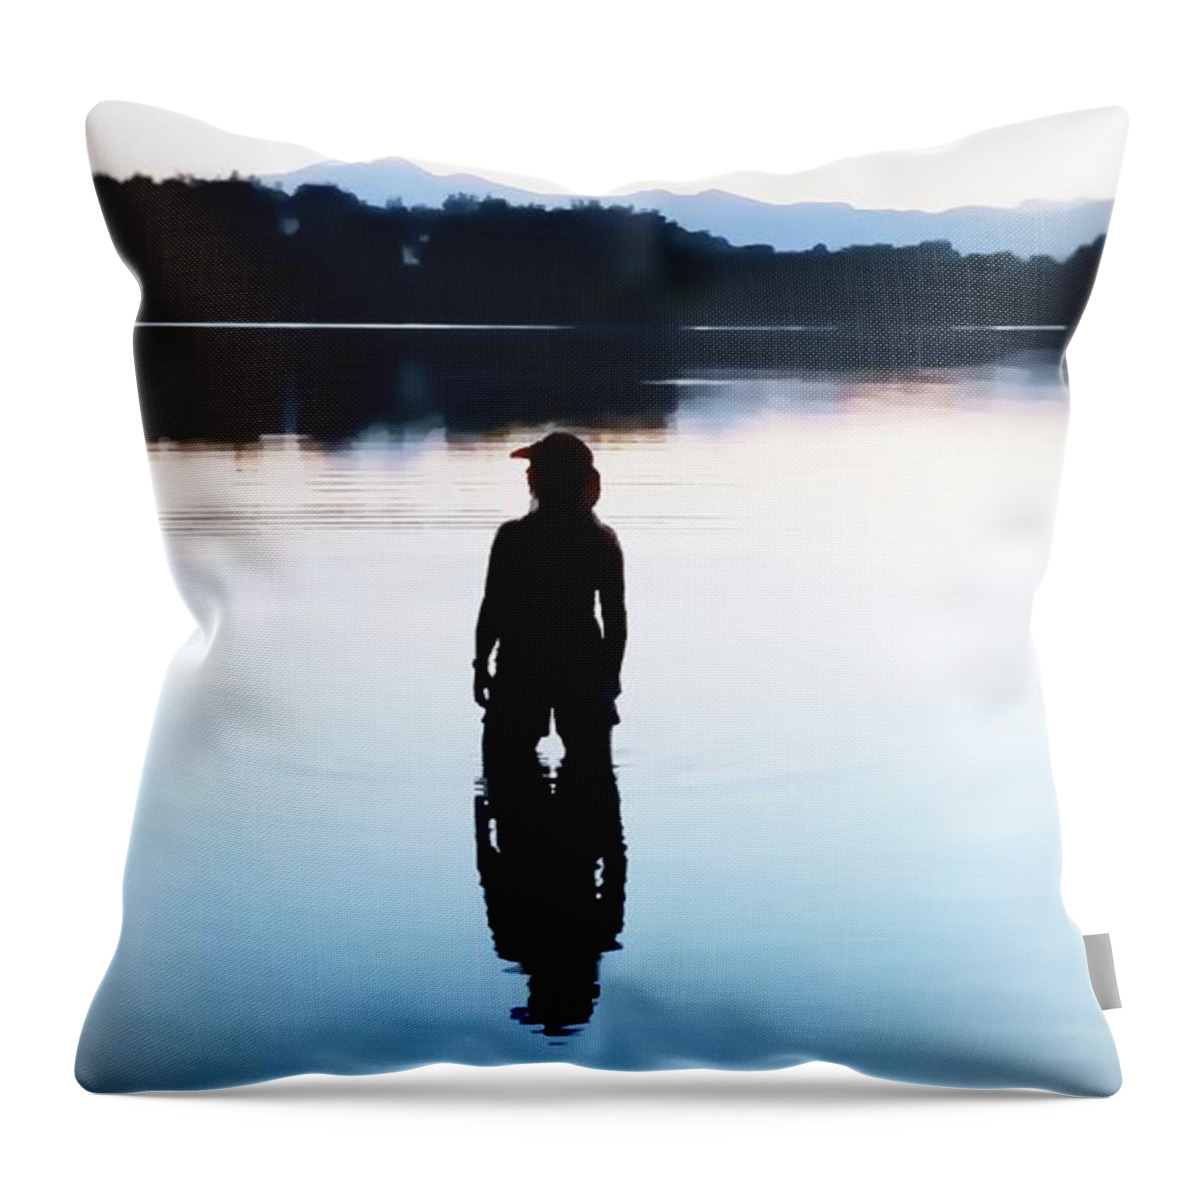 Colorado Throw Pillow featuring the photograph Twin Peaks Silhouette by Joseph Hendrix